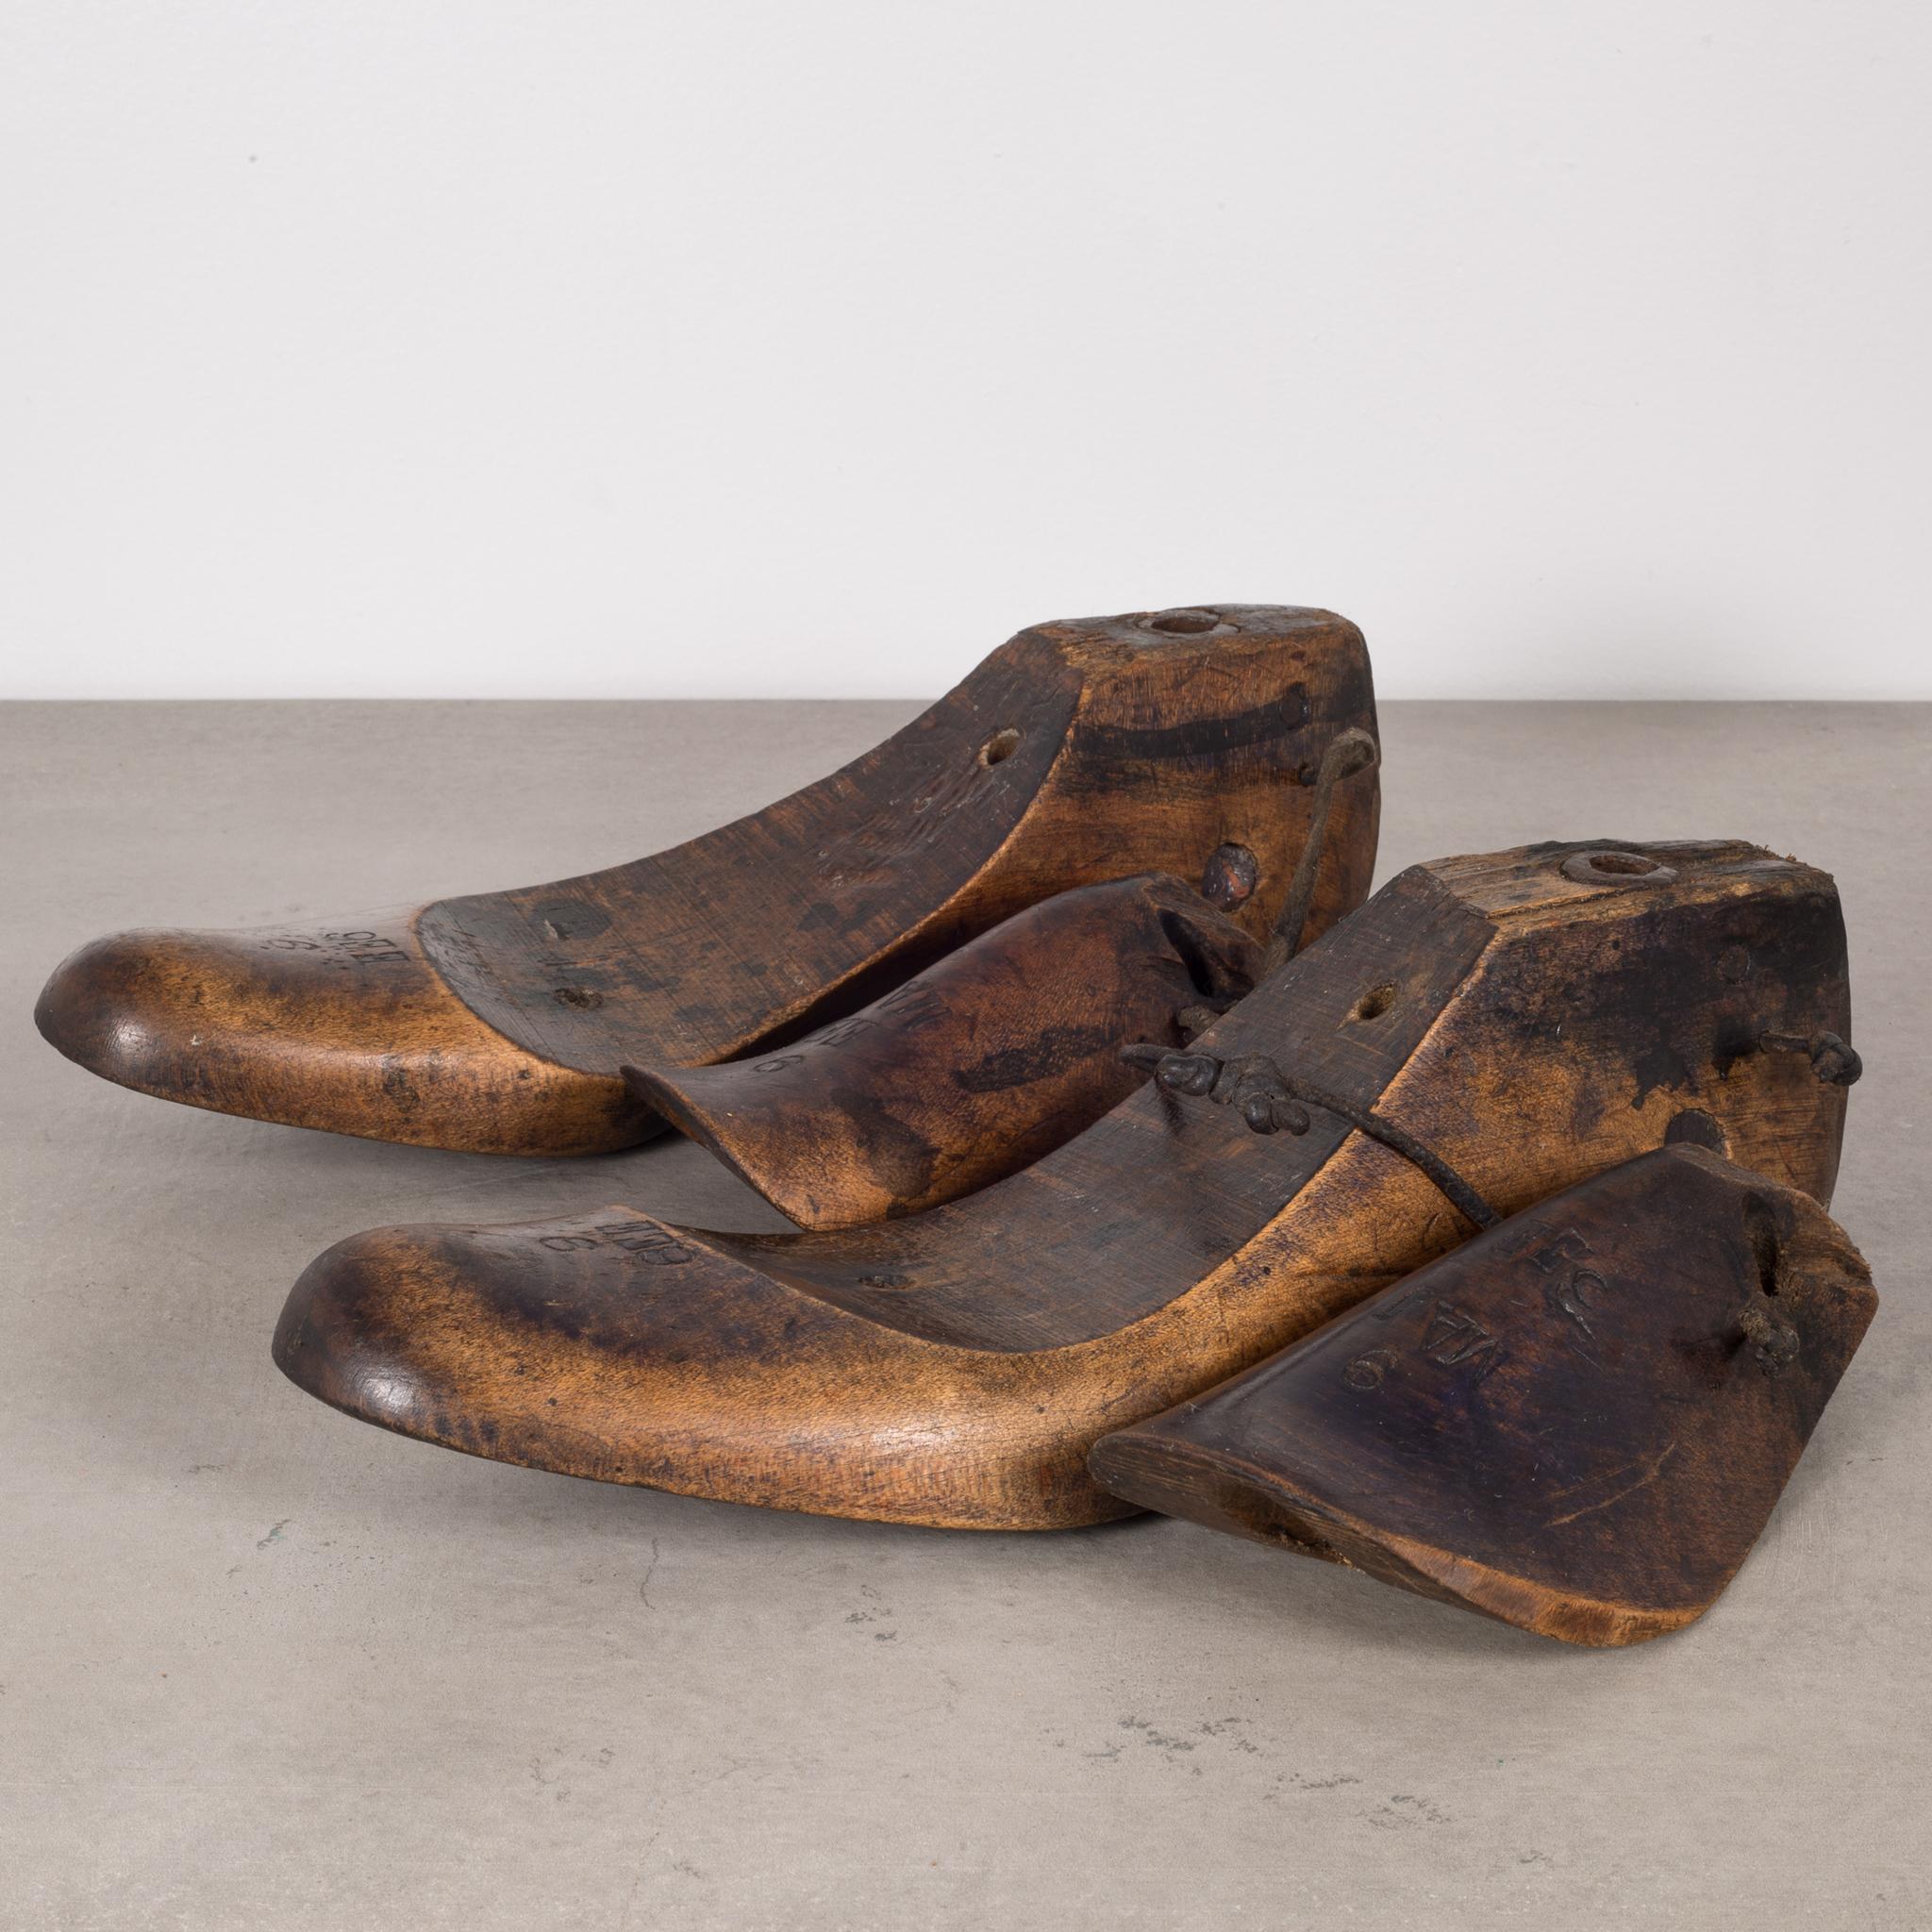 About

This is an original pair of cobbler's wooden shoe last used to make hand crafted shoes for a certain client. The shoe last were kept at the cobbler's shop for custom shoes when the client requested a pair. These shoe last have the client's